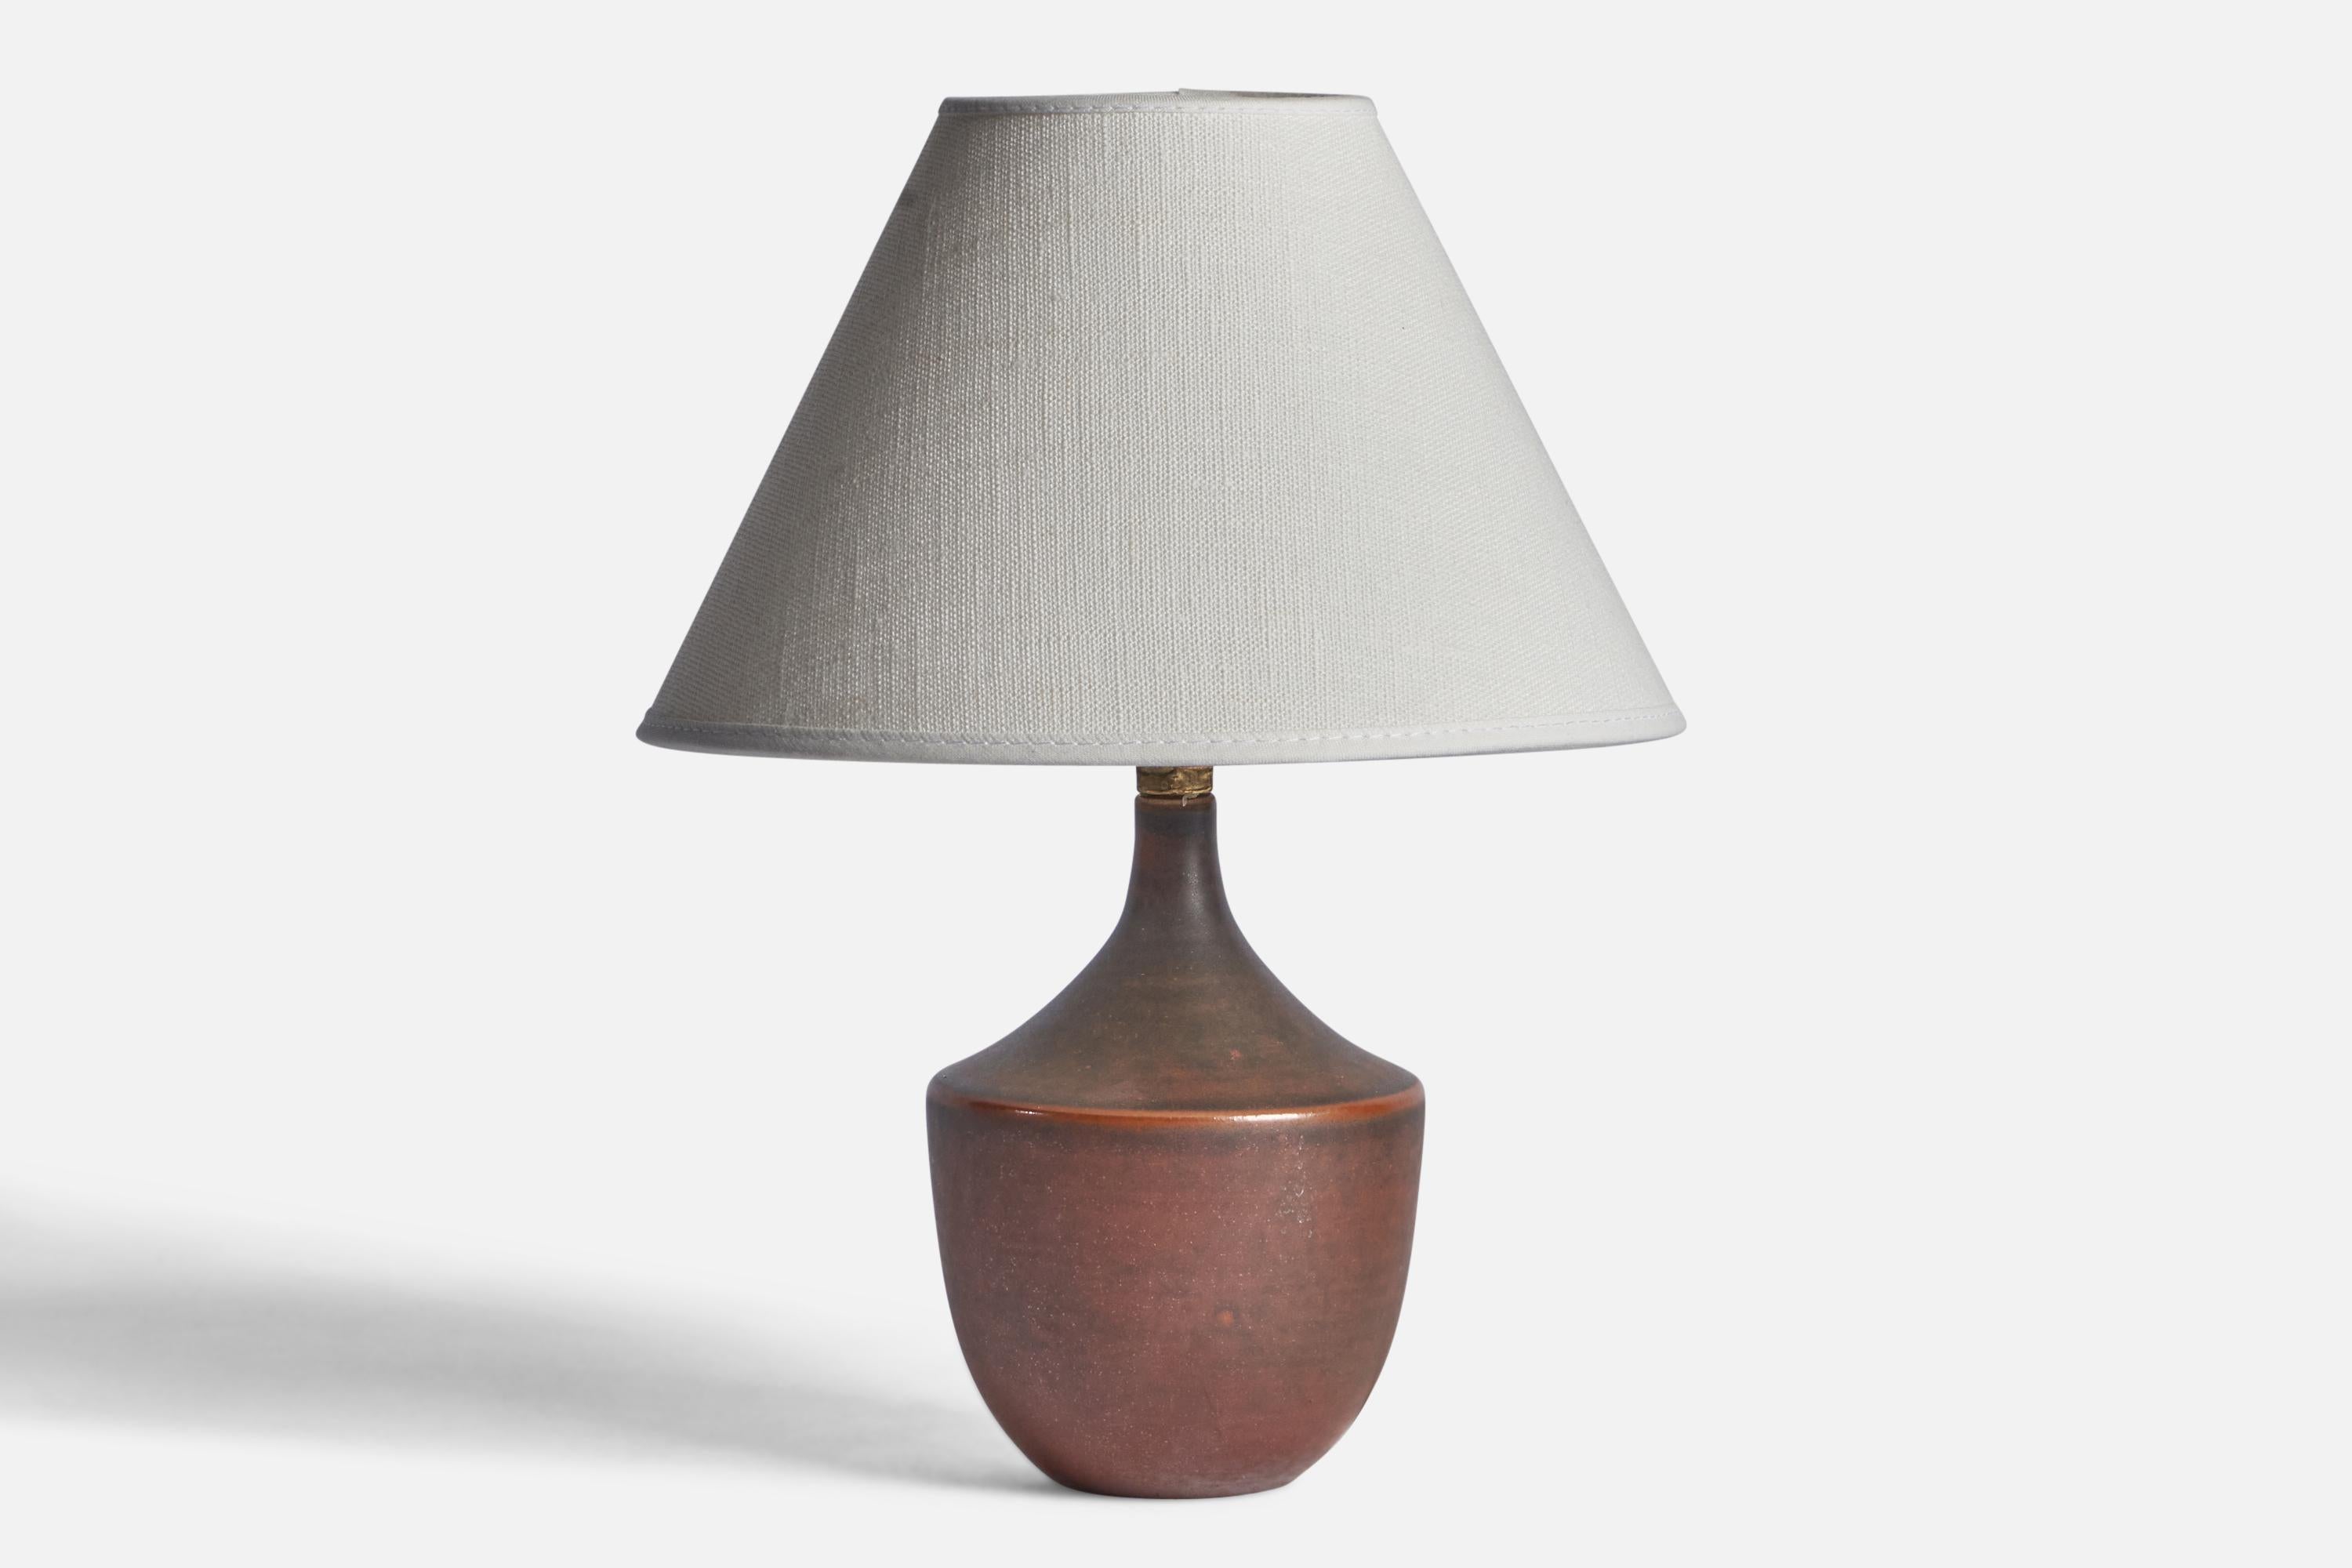 A brown-glazed stoneware table lamp designed and produced by Andersson & Johansson, Höganäs, Sweden, c. 1940s.

Dimensions of Lamp (inches): 7.75” H x 3.85” Diameter
Dimensions of Shade (inches): 3” Top Diameter x 8” Bottom Diameter x 5” H